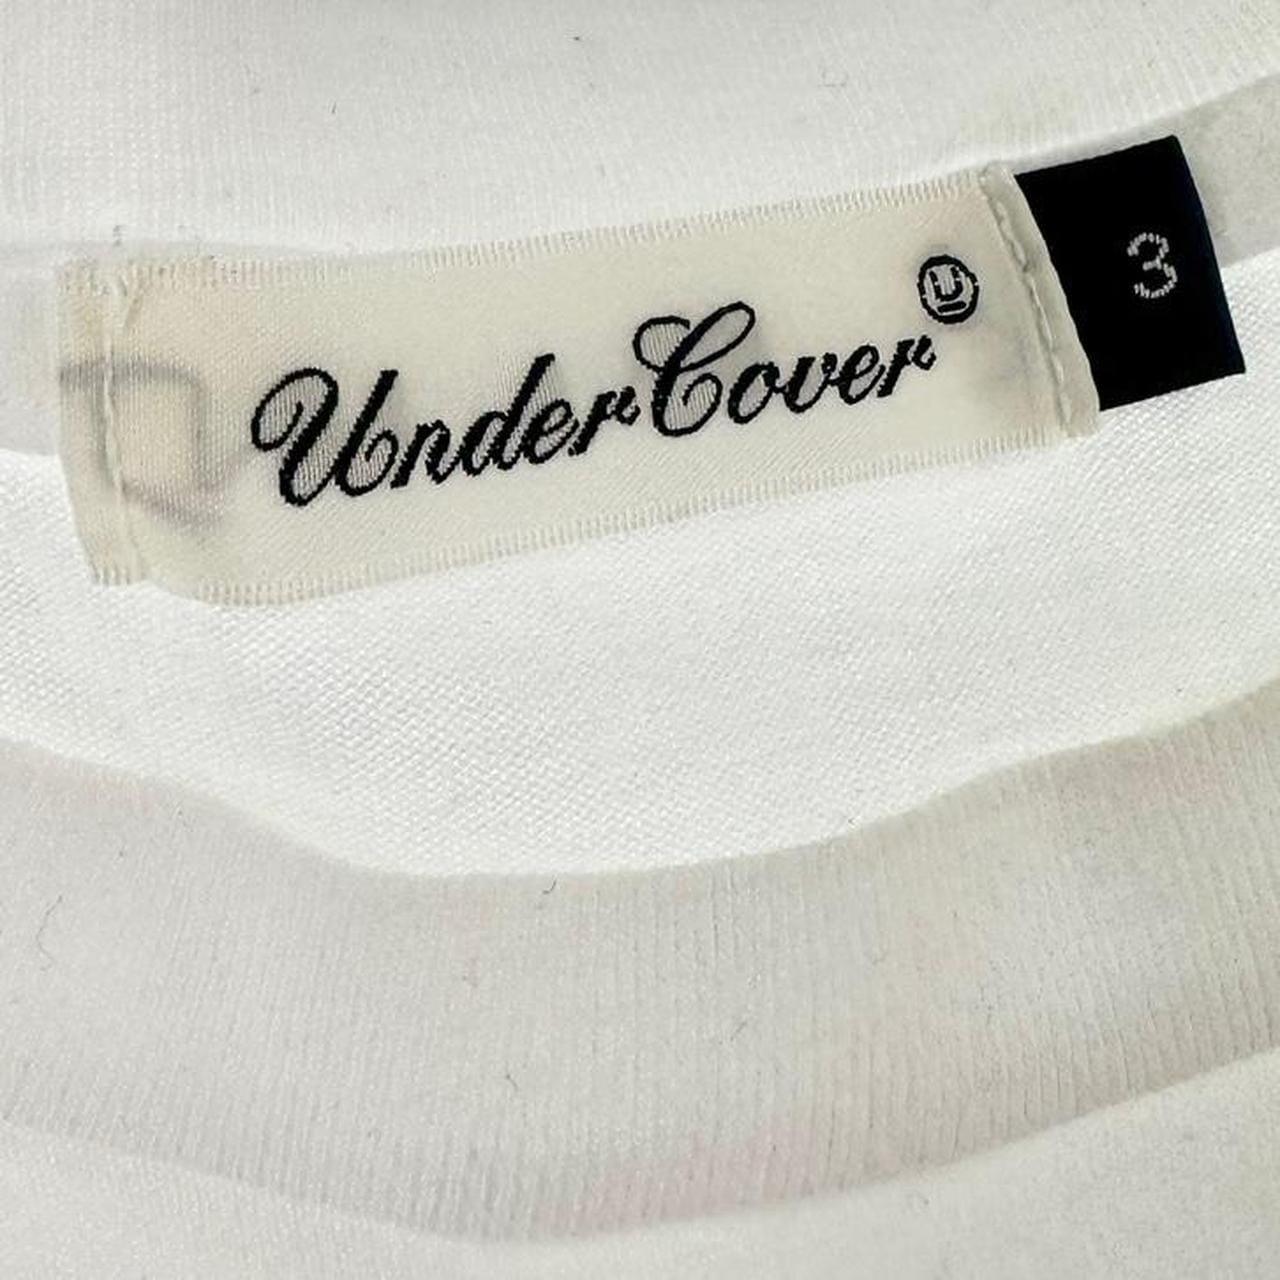 Undercover t shirt size M - Known Source